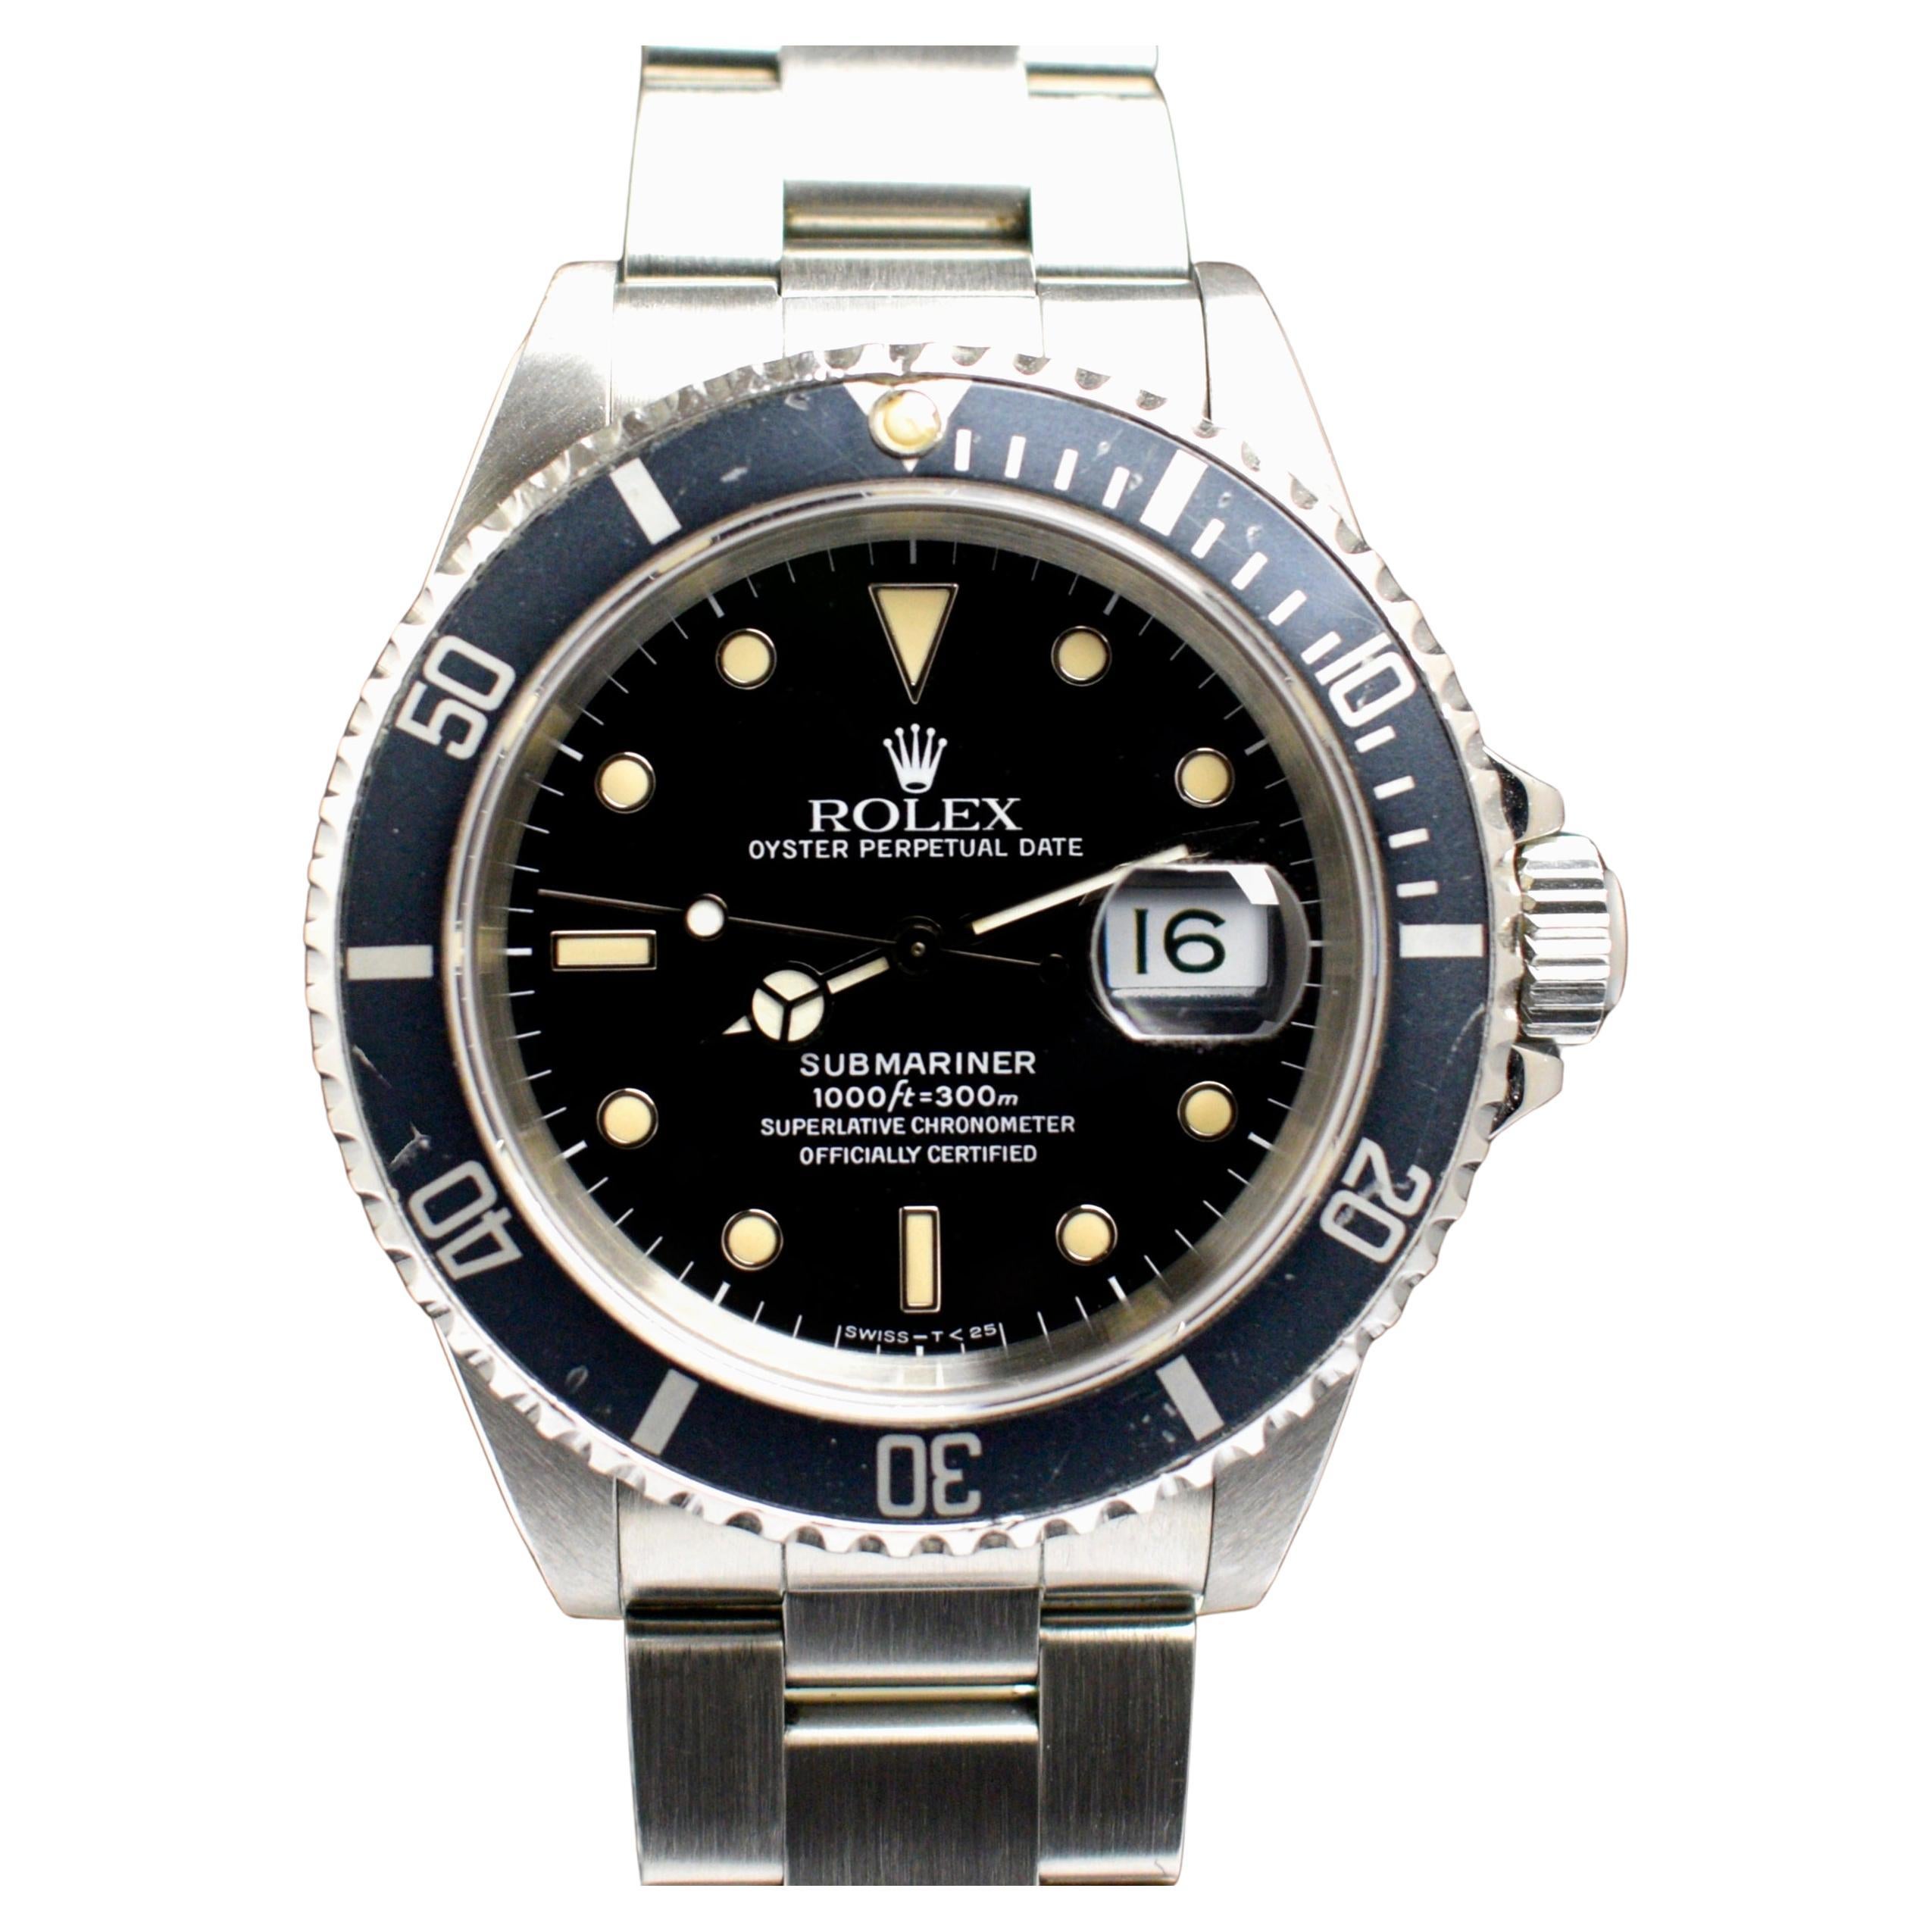 Rolex Submariner 16610 Creamy Date with paper Steel Automatic Watch, 1990